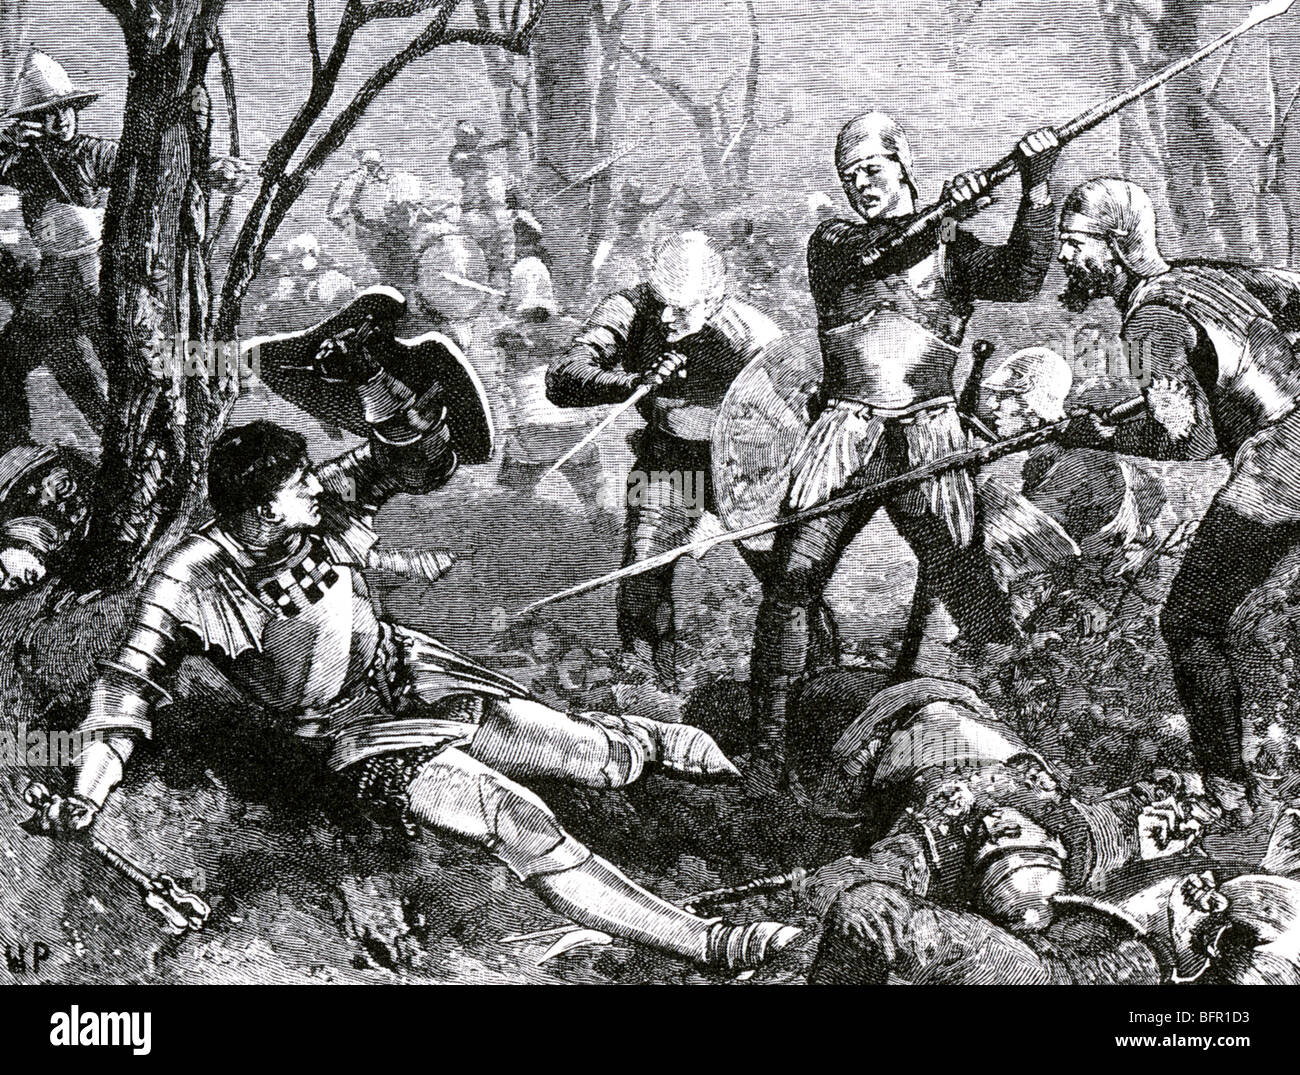 BATTLE OF BARNET 14 April 1471 - death of Warwick the Kingmaker in a 19th century engraving Stock Photo